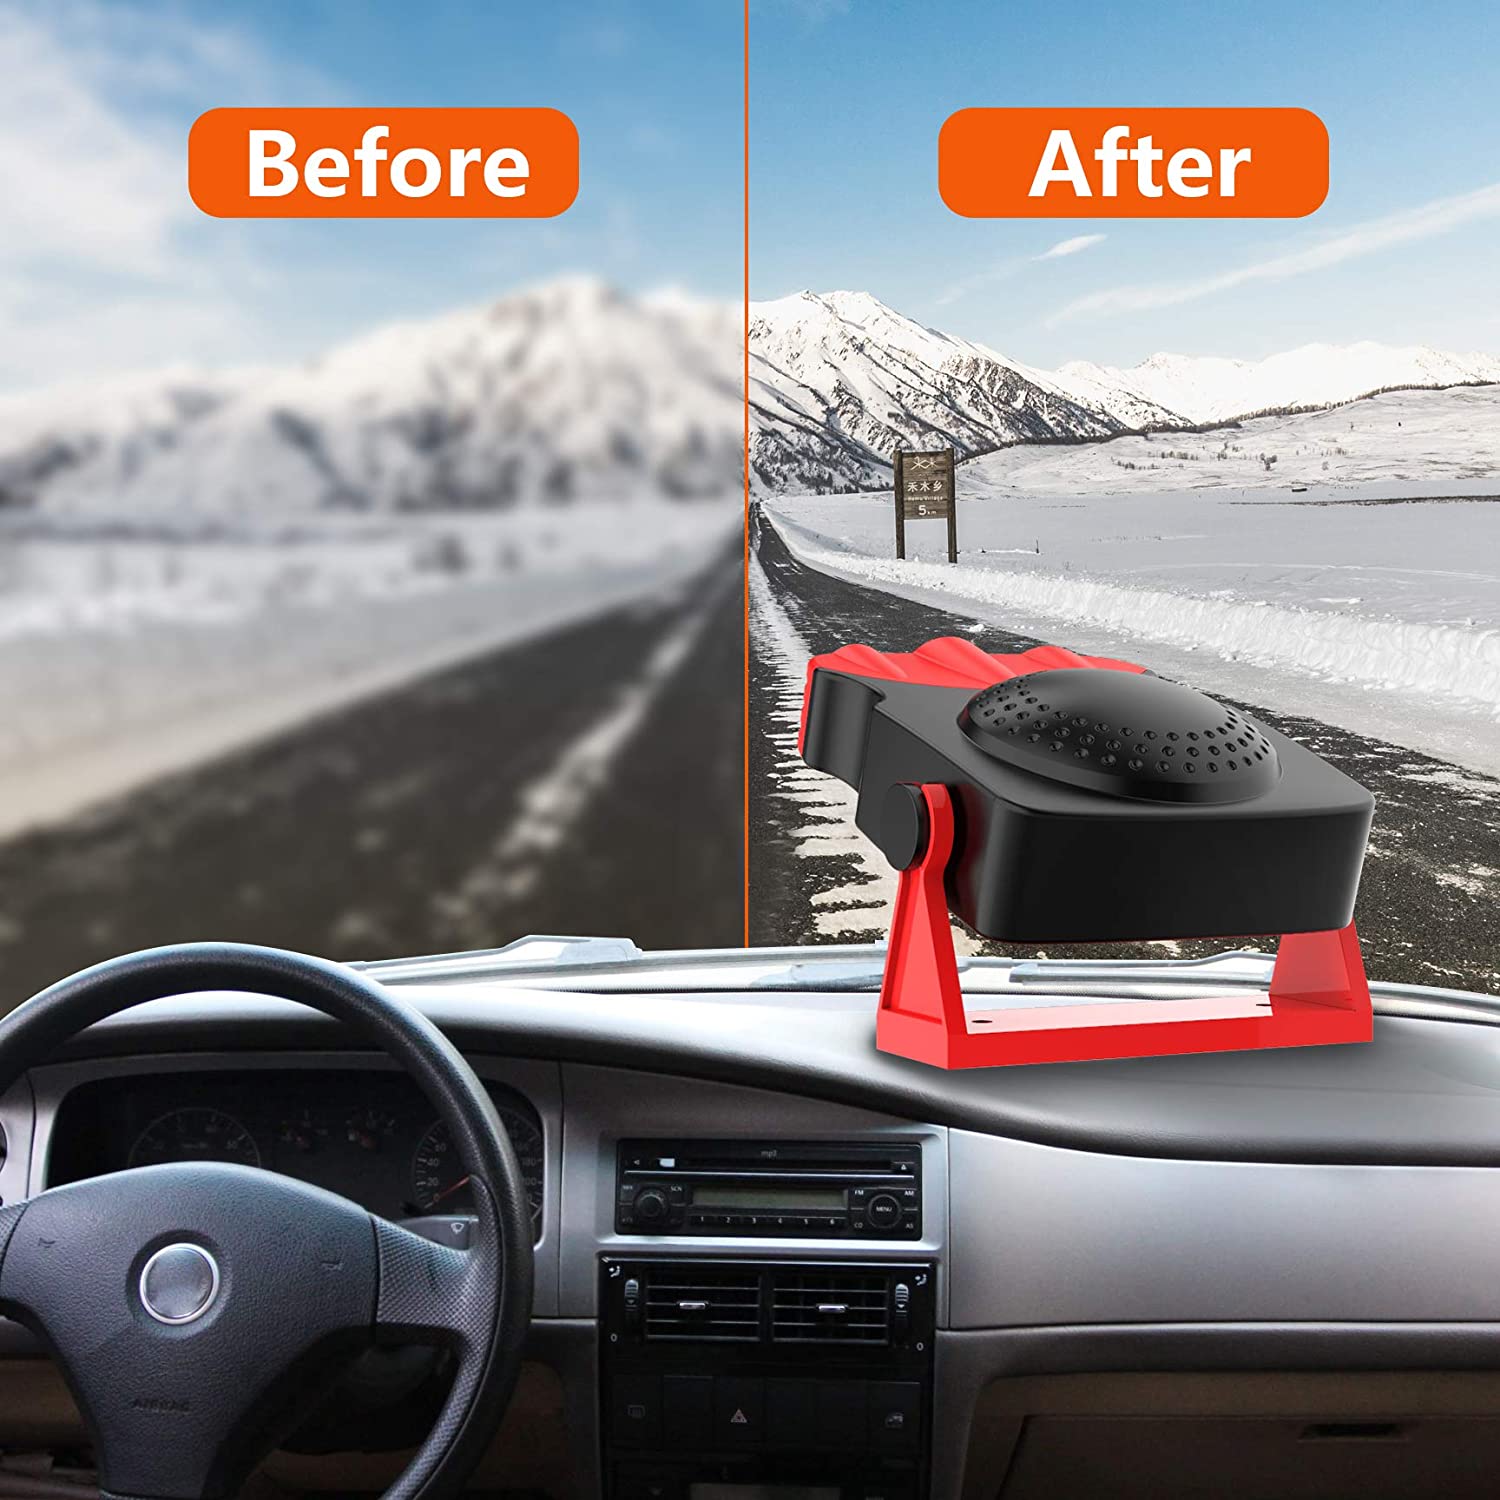 Car Heater,12v Auto Heater Fan,Fast Heating Car Windshield Defrost De –  icarscars - Your Preferred Auto Parts